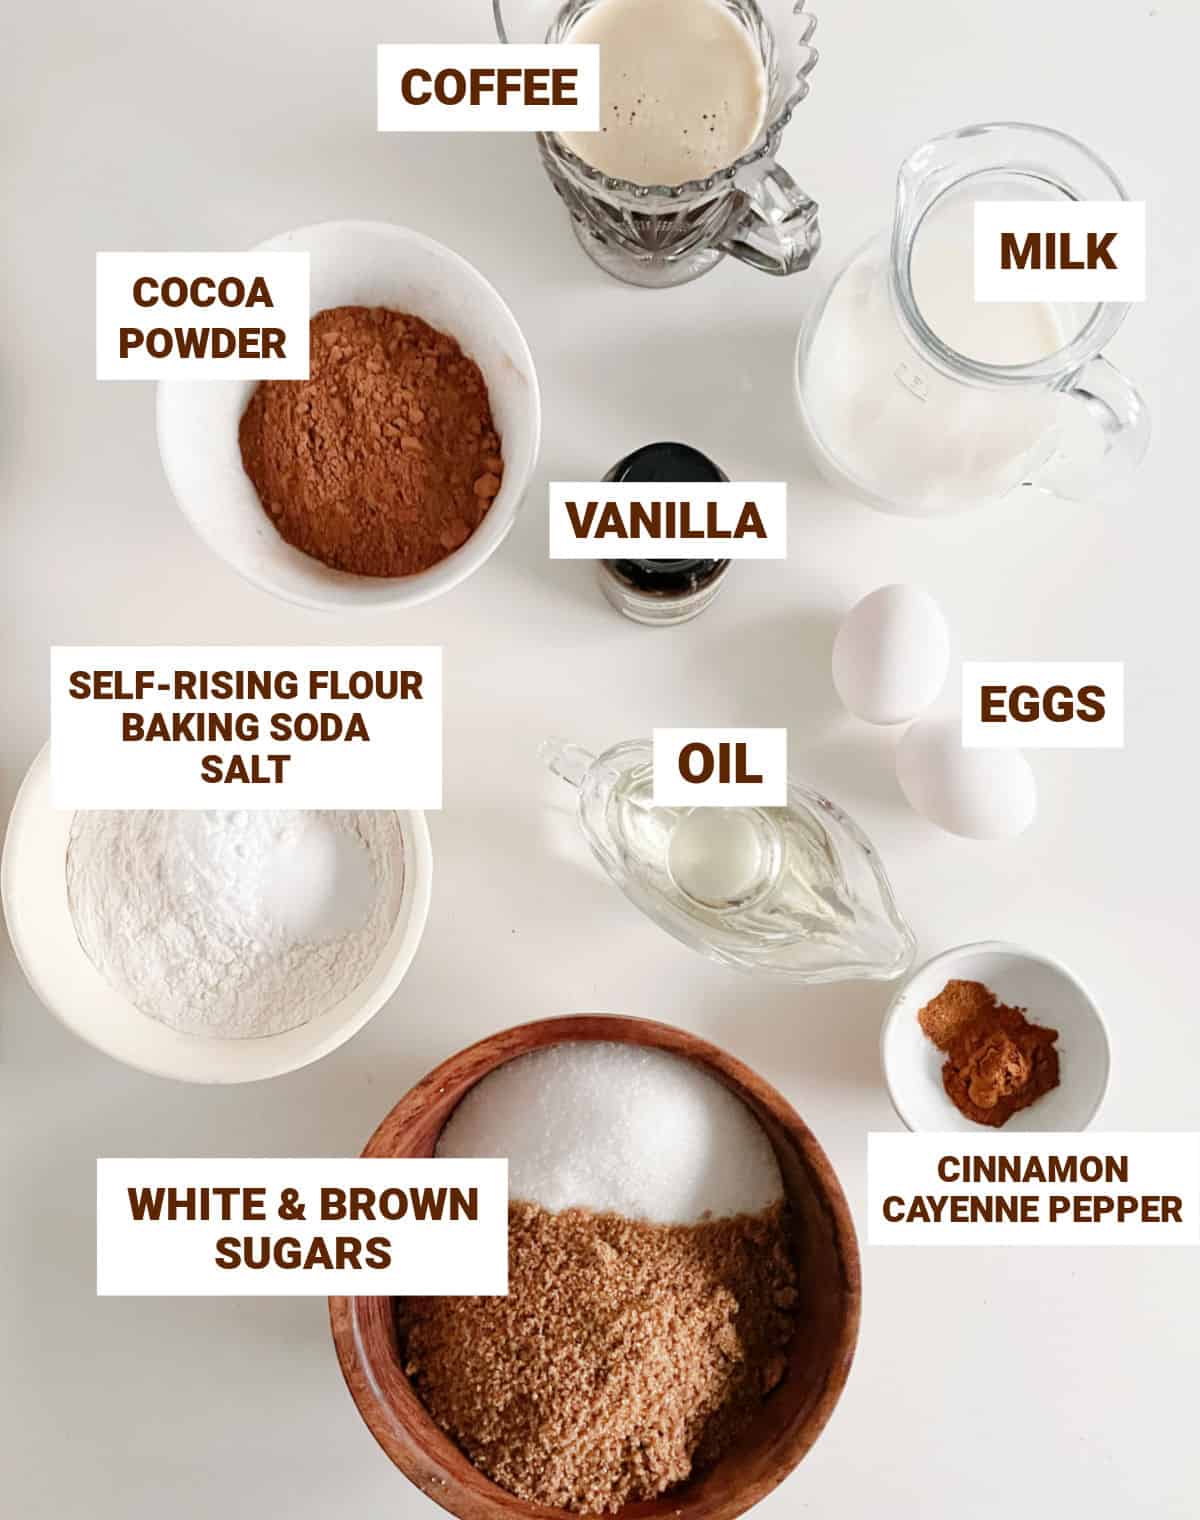 White surface with bowls containing ingredients for chocolate cake including cinnamon, spices, oil, coffee, milk, eggs, sugars, cocoa, vanilla, flour mixture.